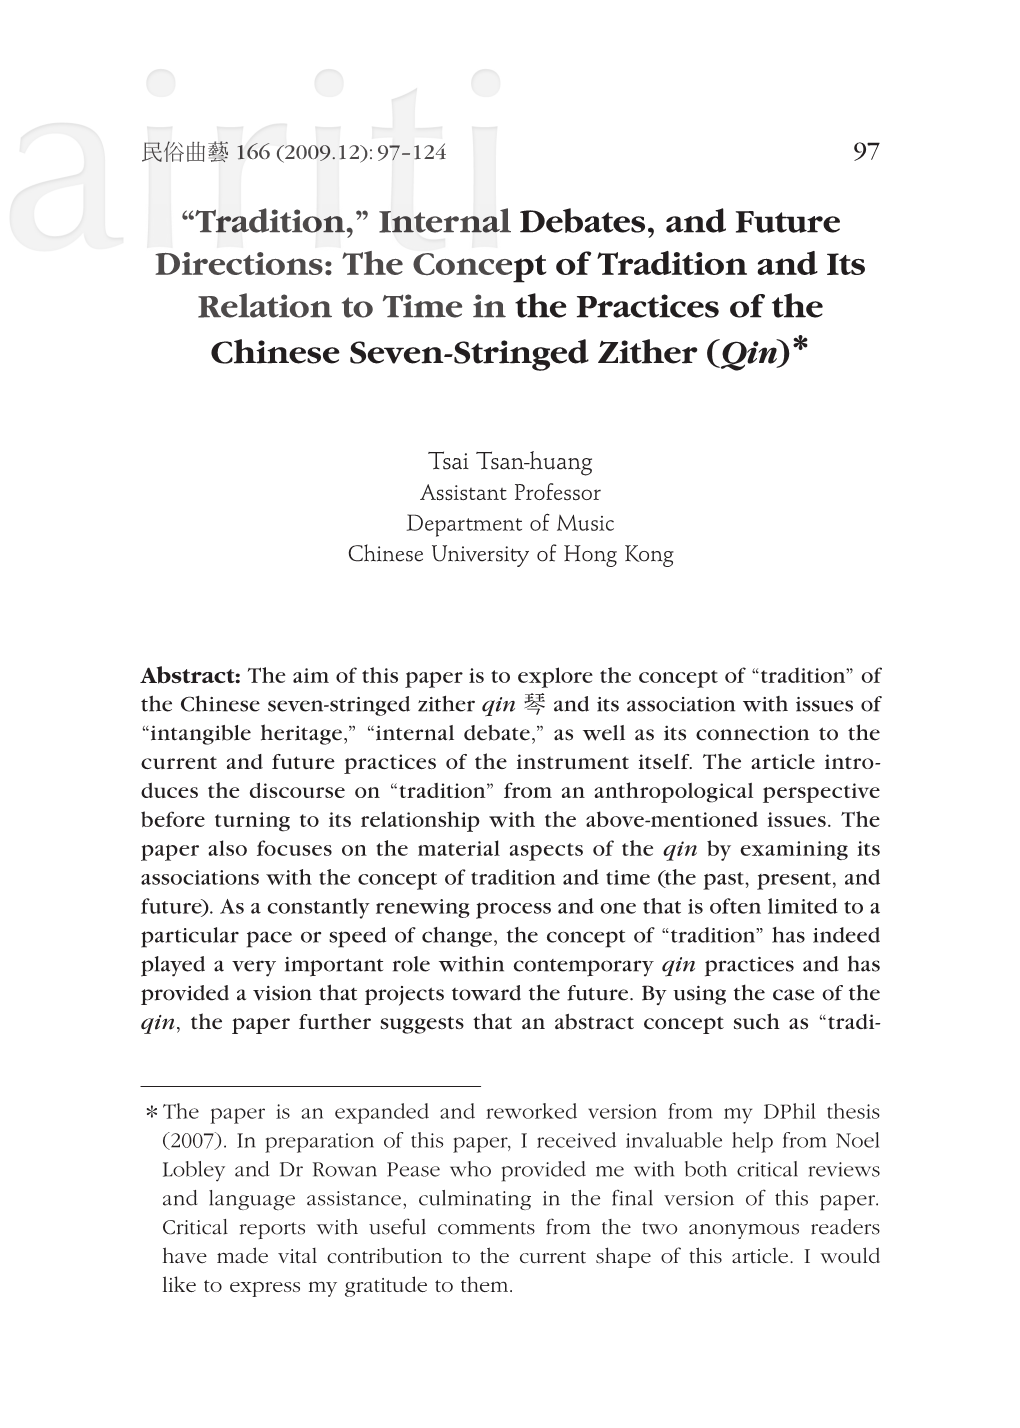 “Tradition,” Internal Debates, and Future Directions: the Concept of Tradition and Its Relation to Time in the Practices of the Chinese Seven-Stringed Zither (Qin)*